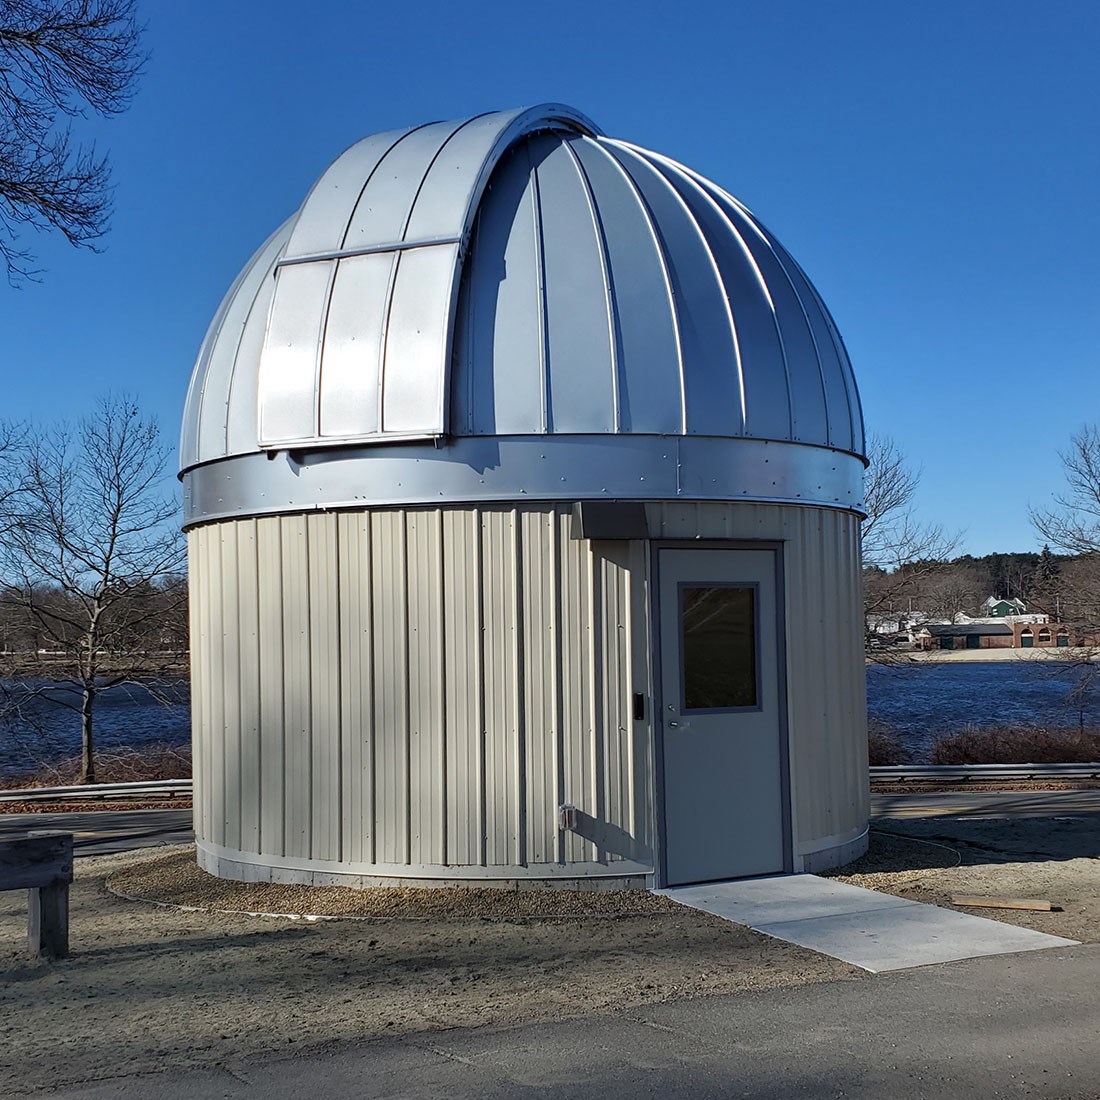 The dome on the observatory is complete. The river is visible in the background. 